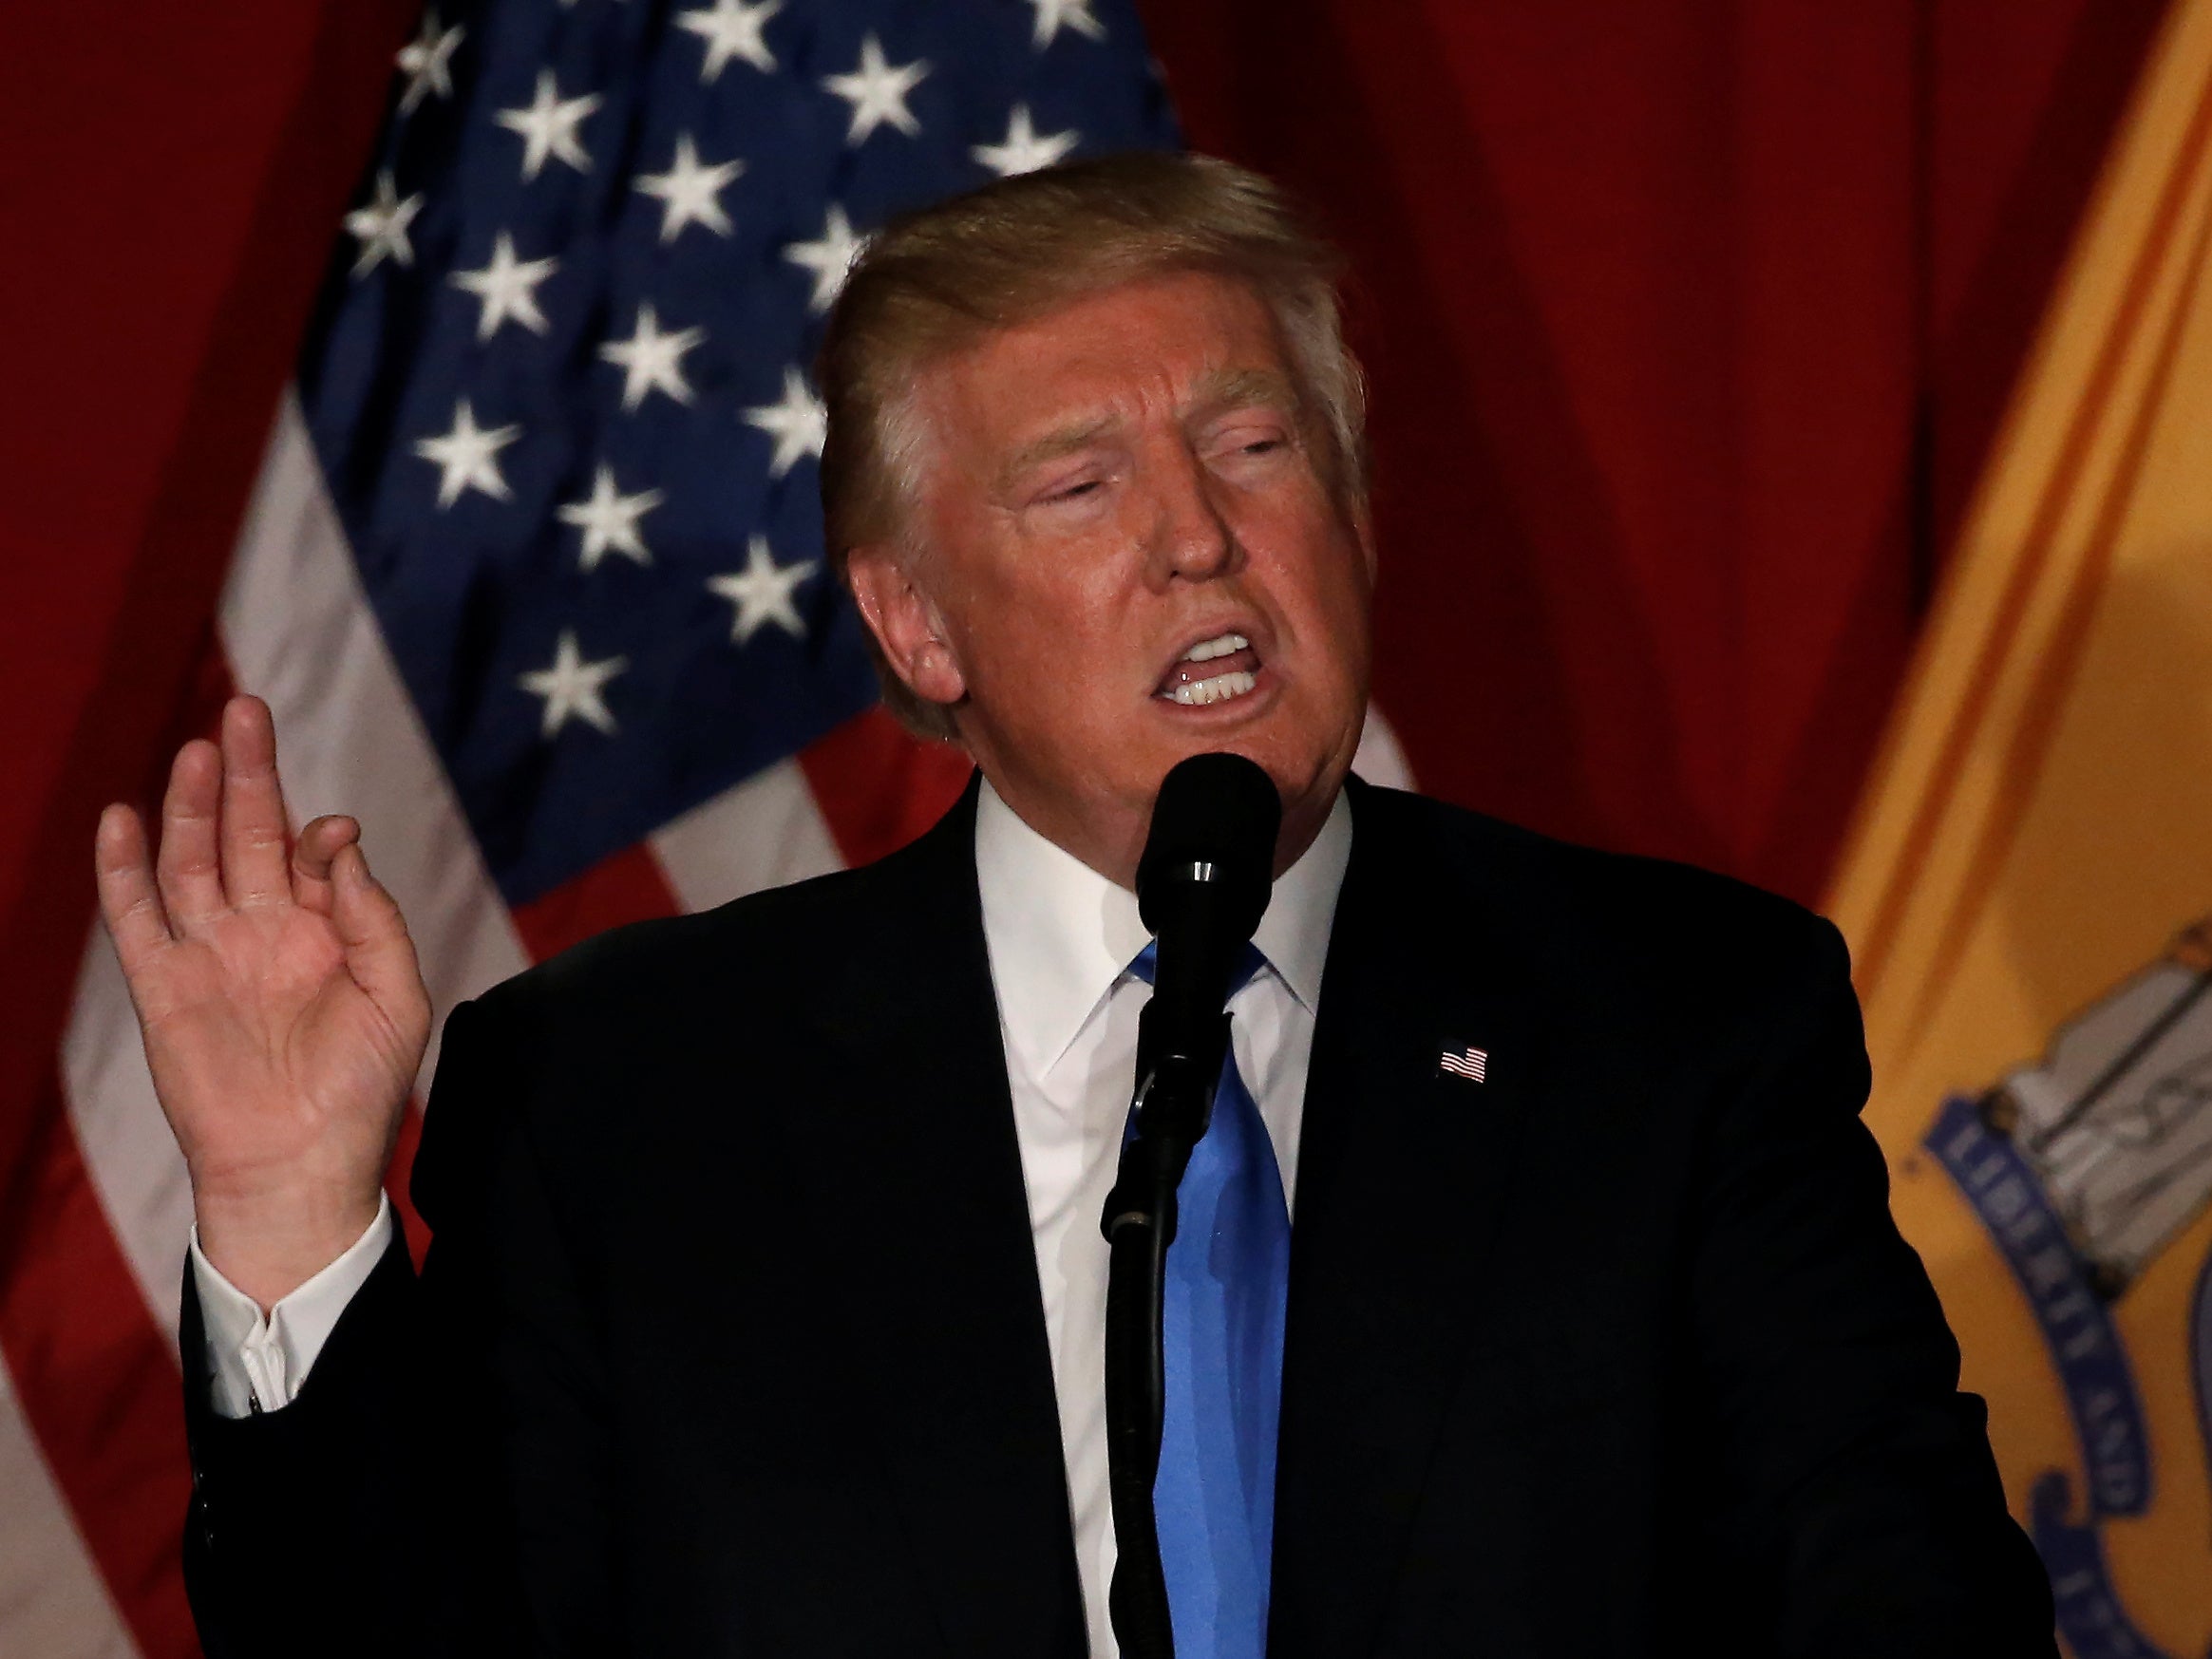 Republican presidential candidate Donald Trump speaks at a fundraising event in New Jersey on 19 May